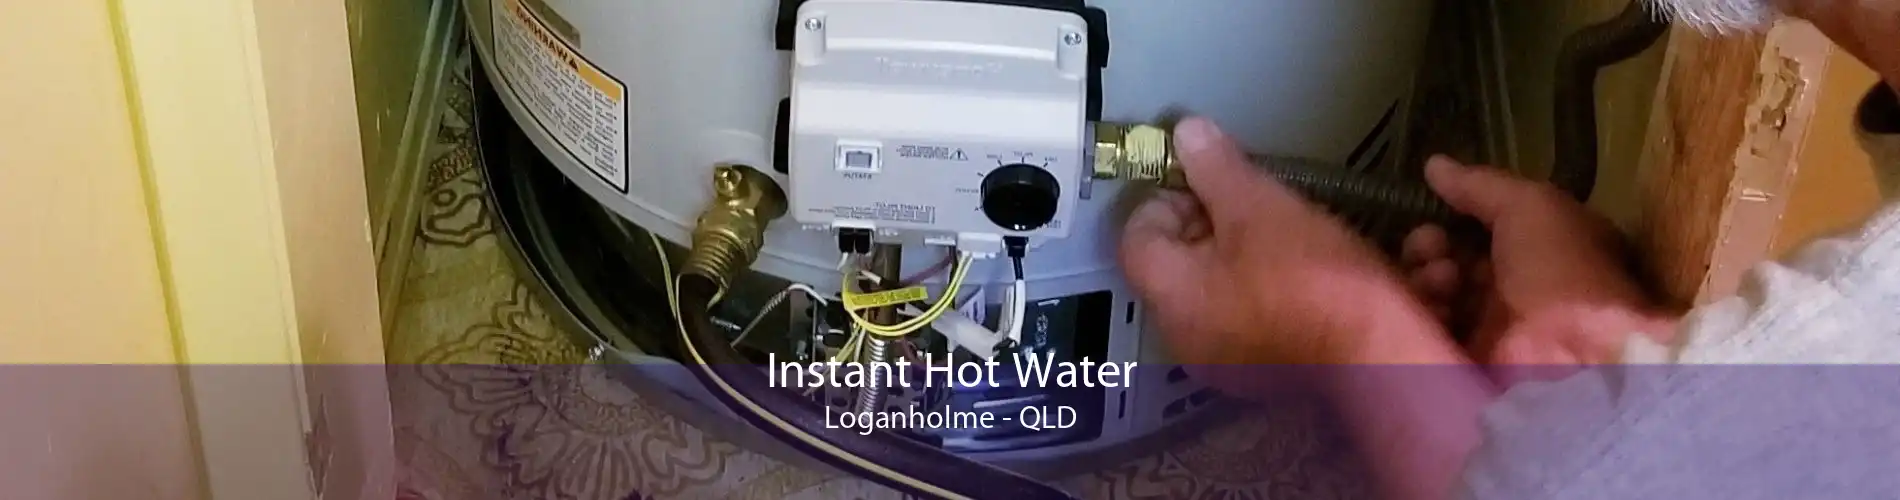 Instant Hot Water Loganholme - QLD